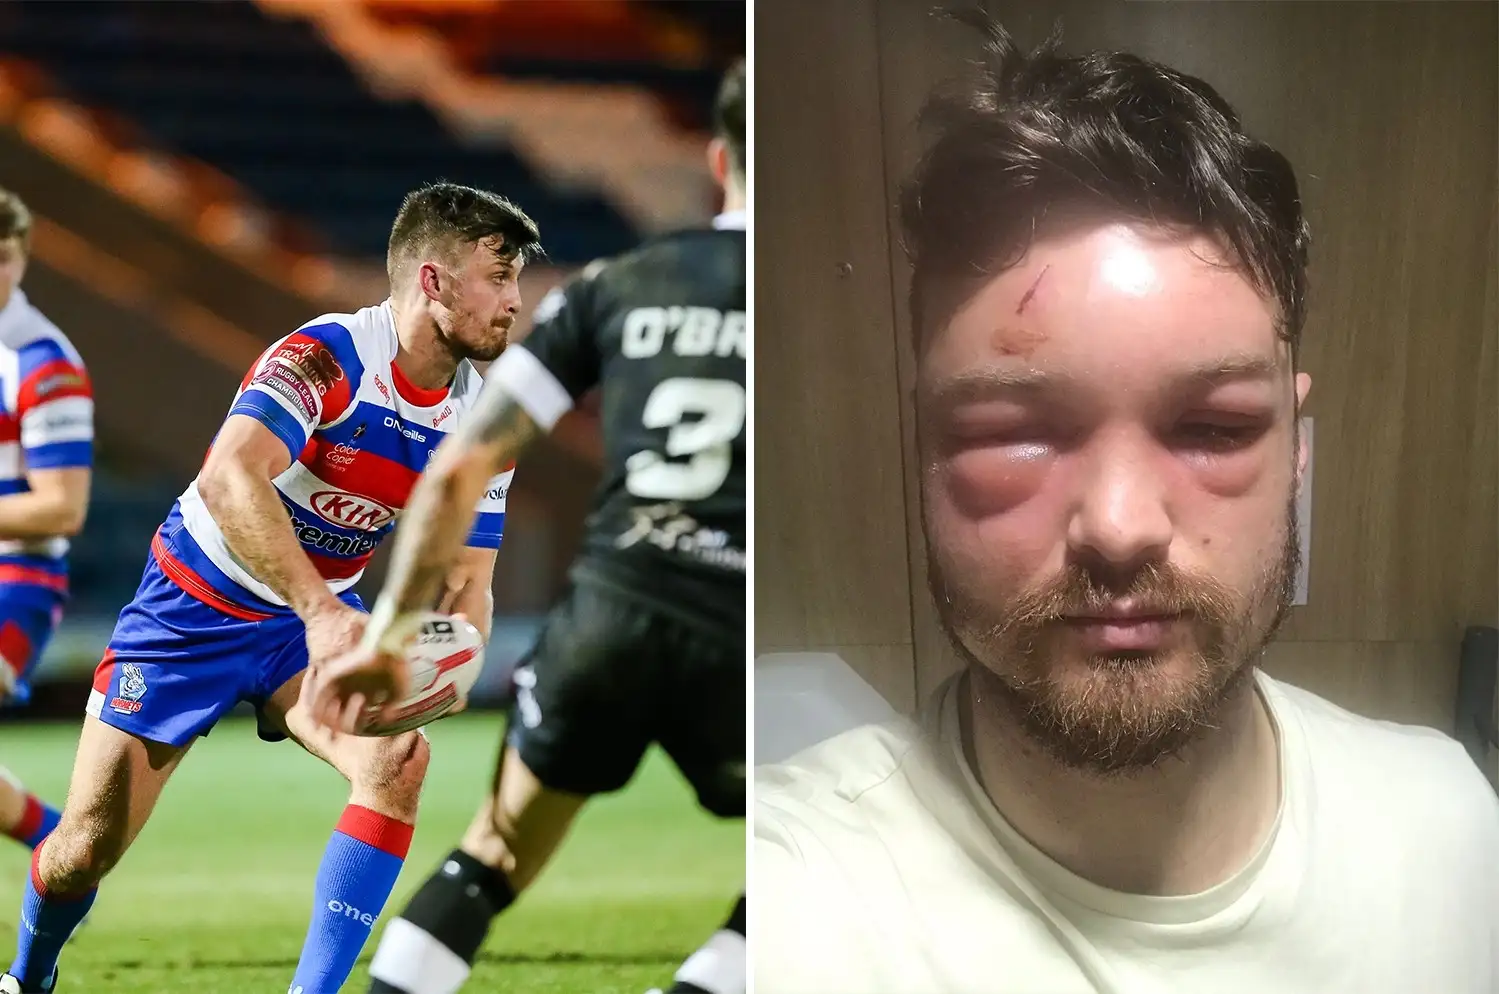 Rochdale star Lewis Palfrey in hospital over serious infection